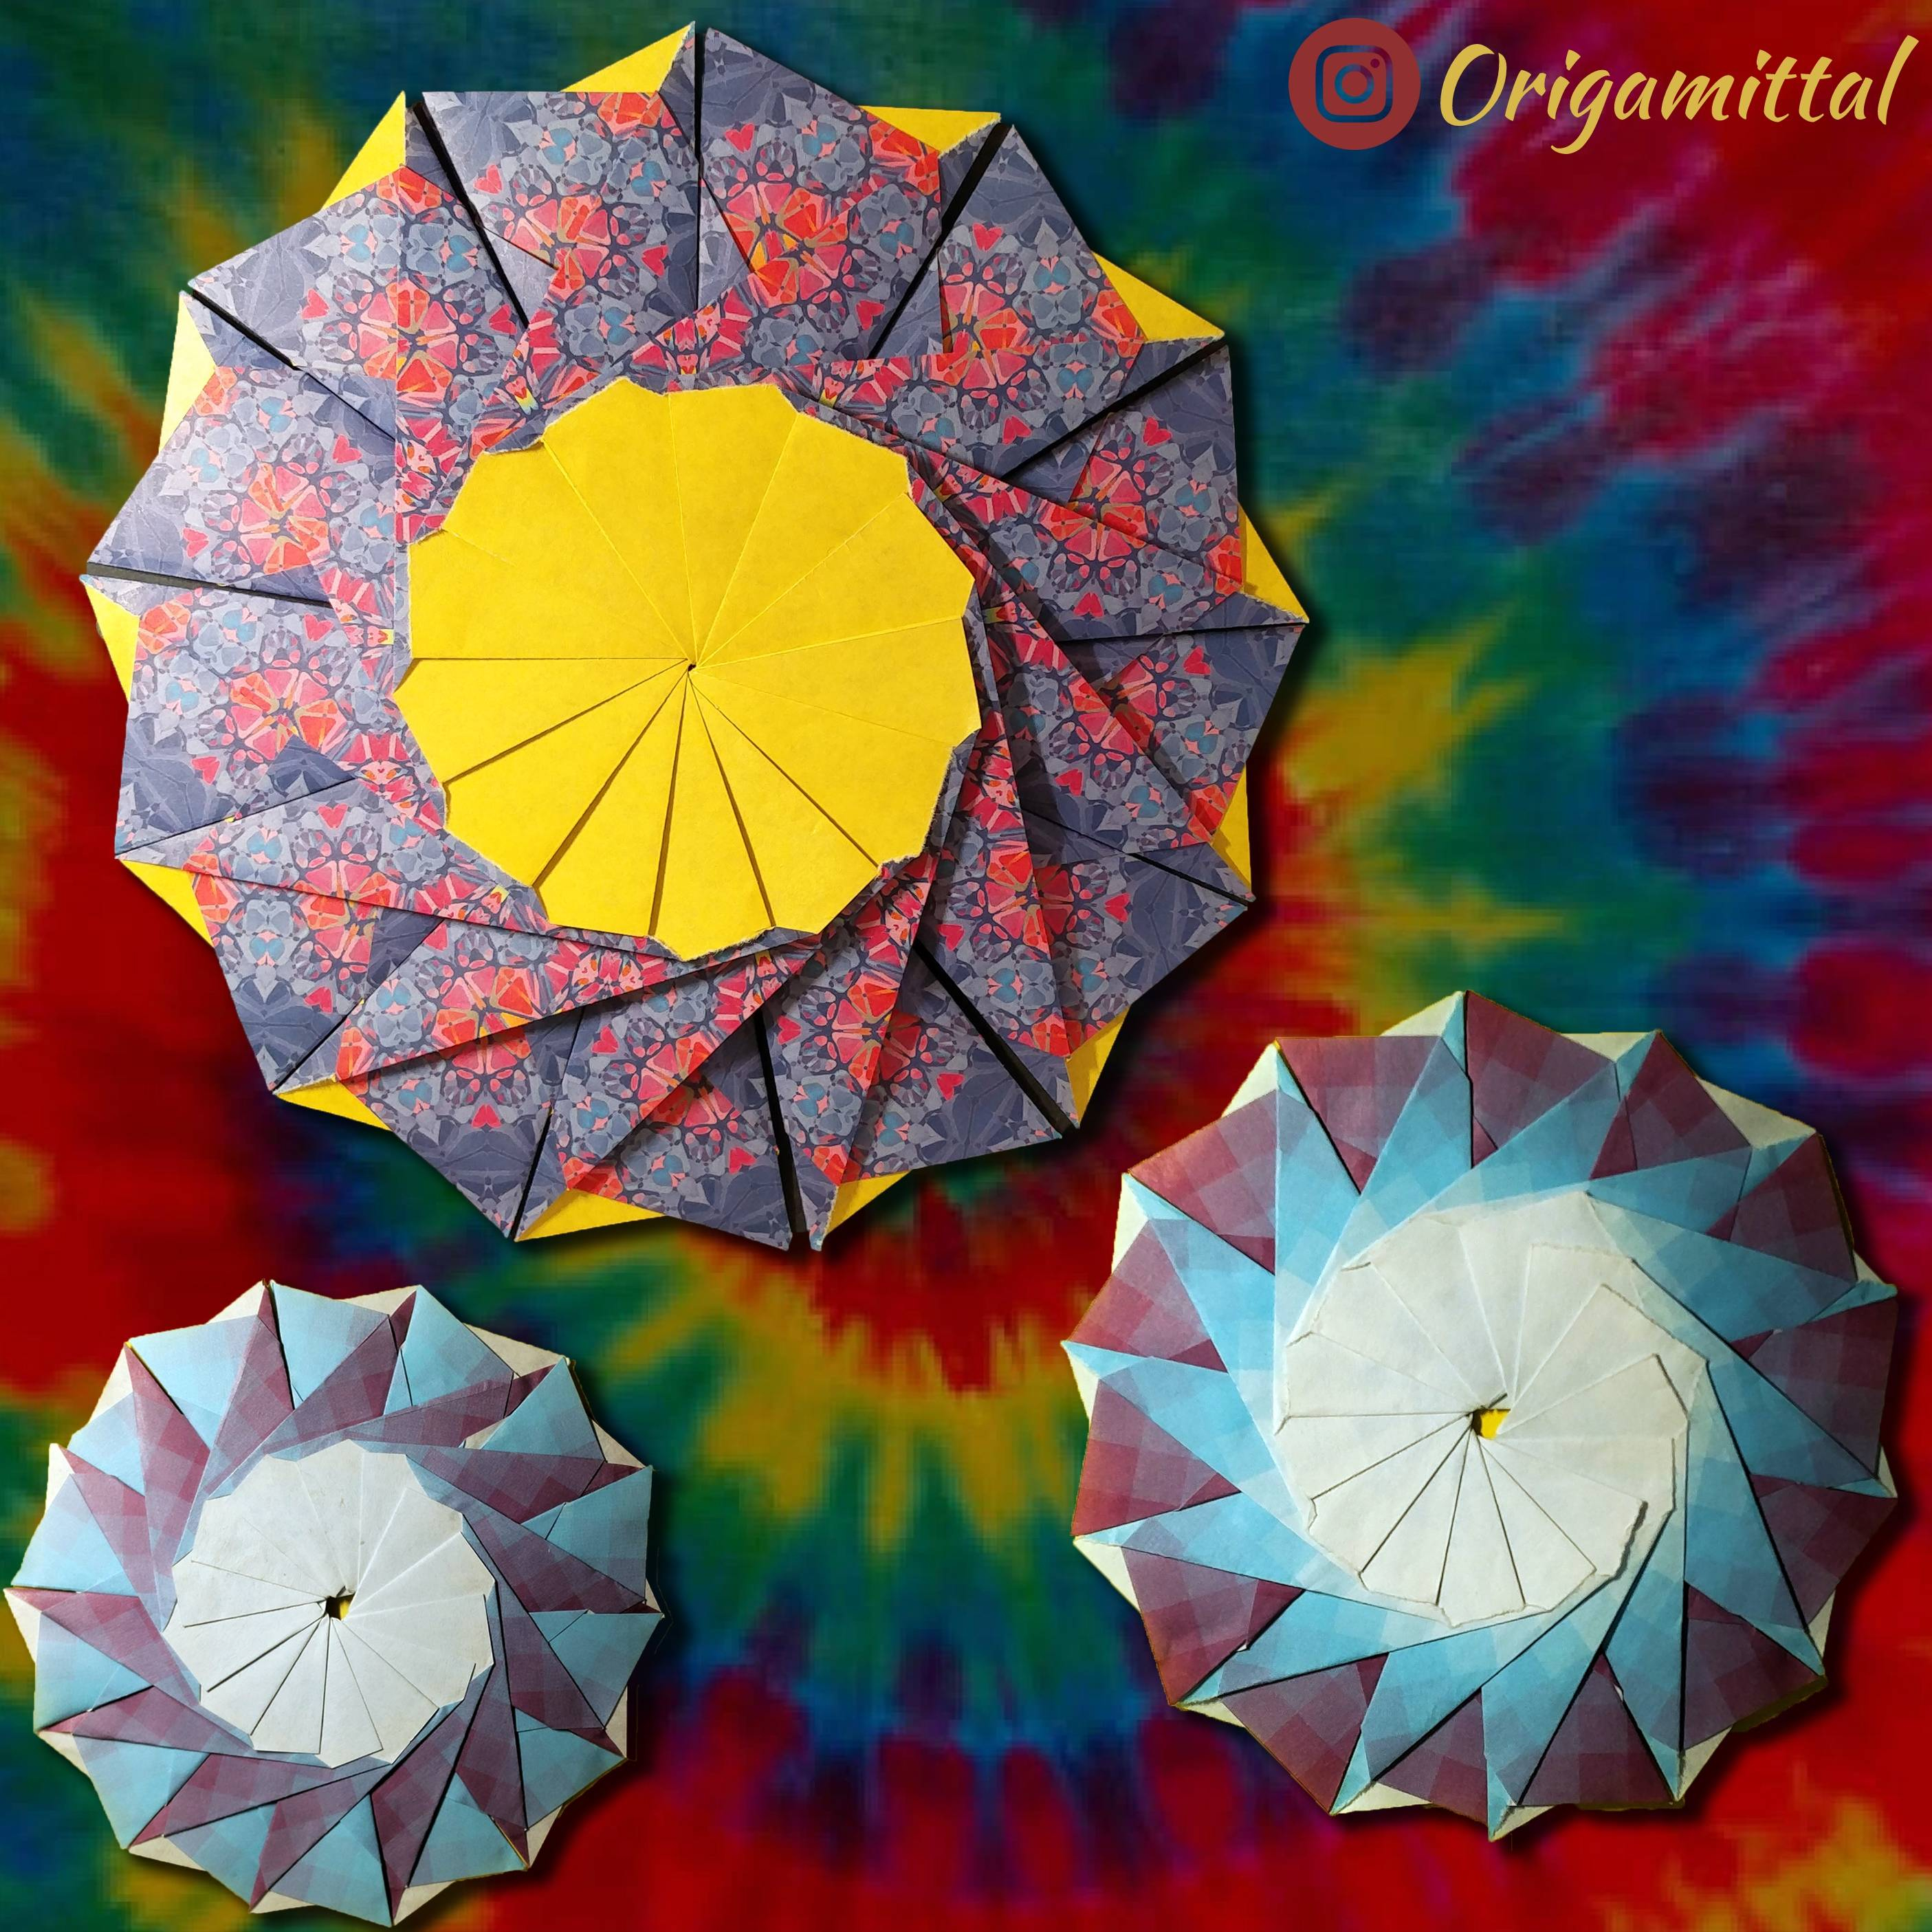 Harmony Origami Paper Some Junko Mandalas I Folded From Harmony And Patterned Papers Imgur